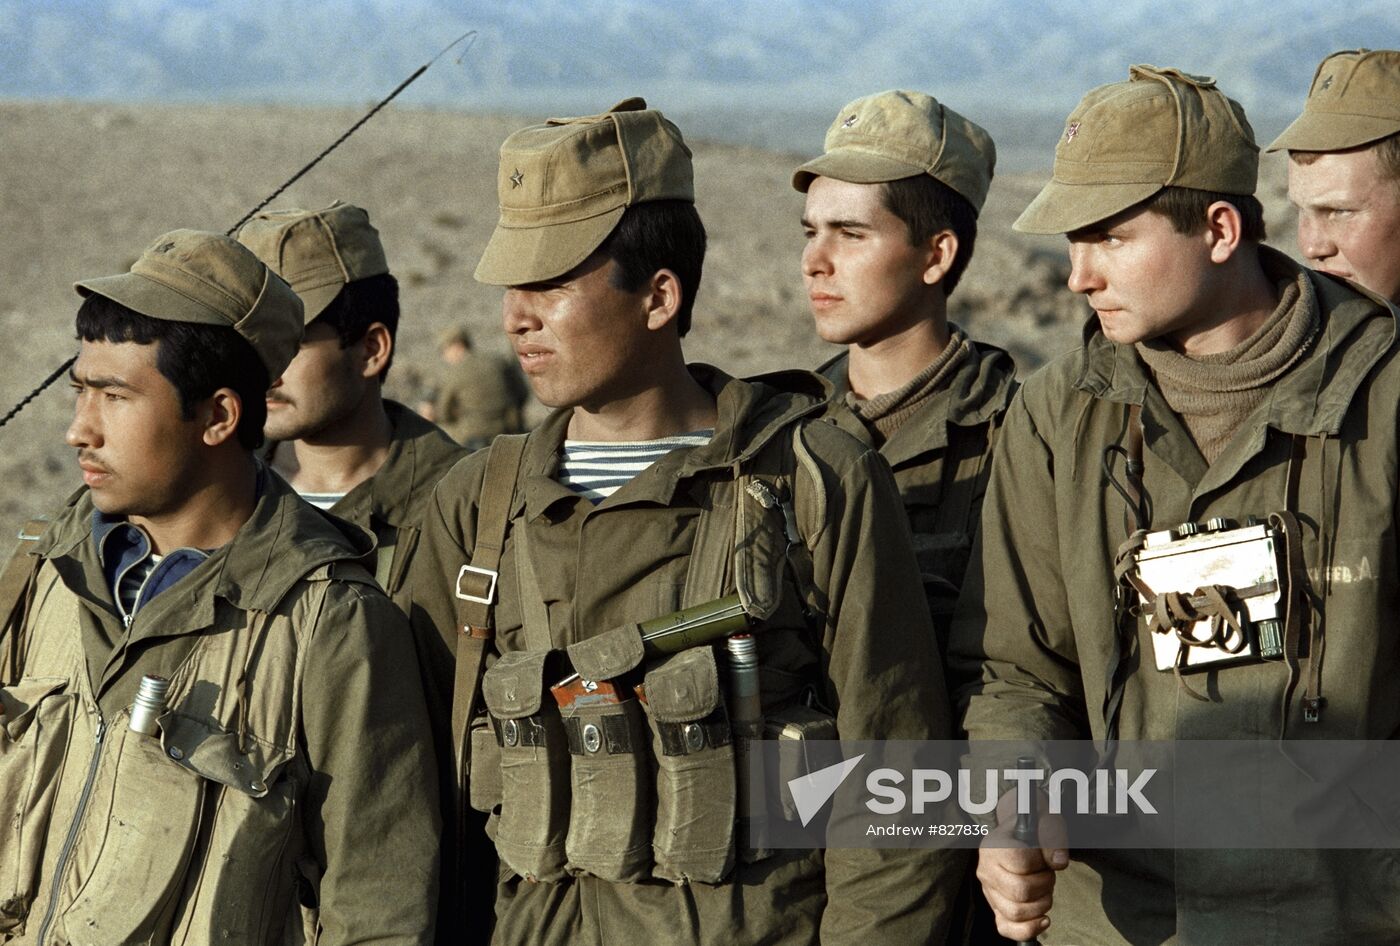 Limited contingent of Soviet troops in Afghanistan